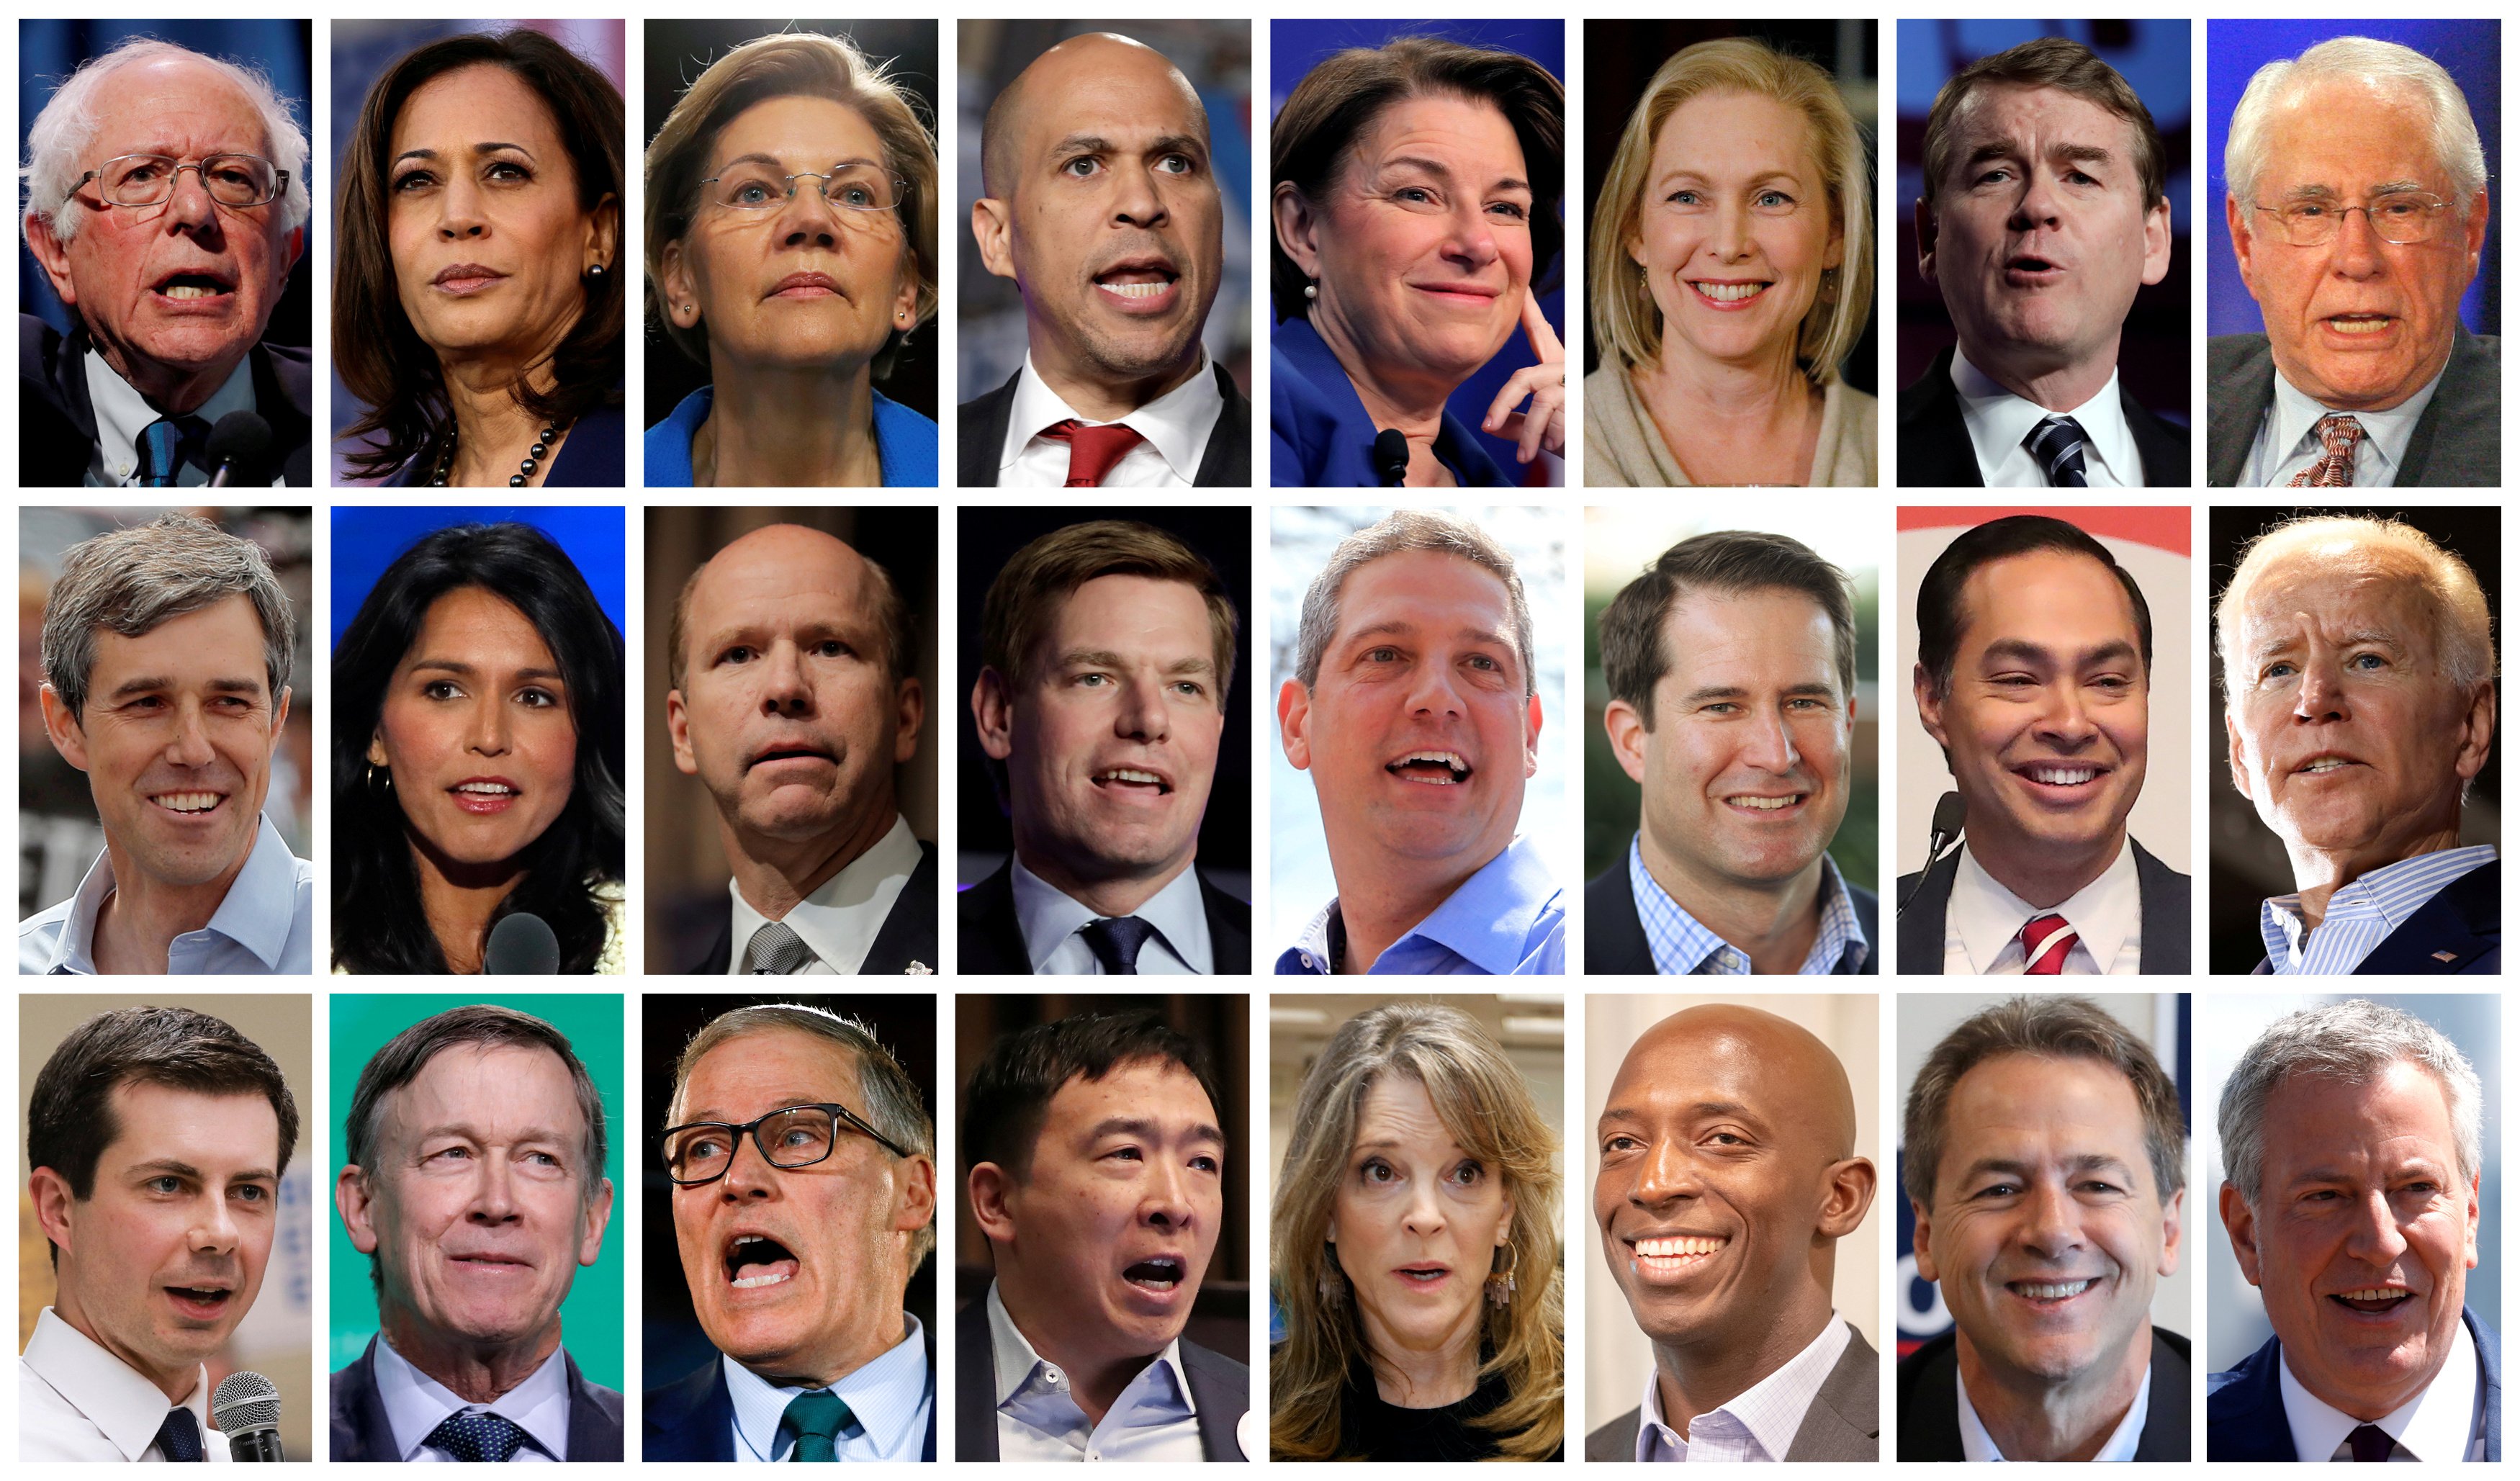 Twenty four 2020 Democratic presidential candidates in a combination photos